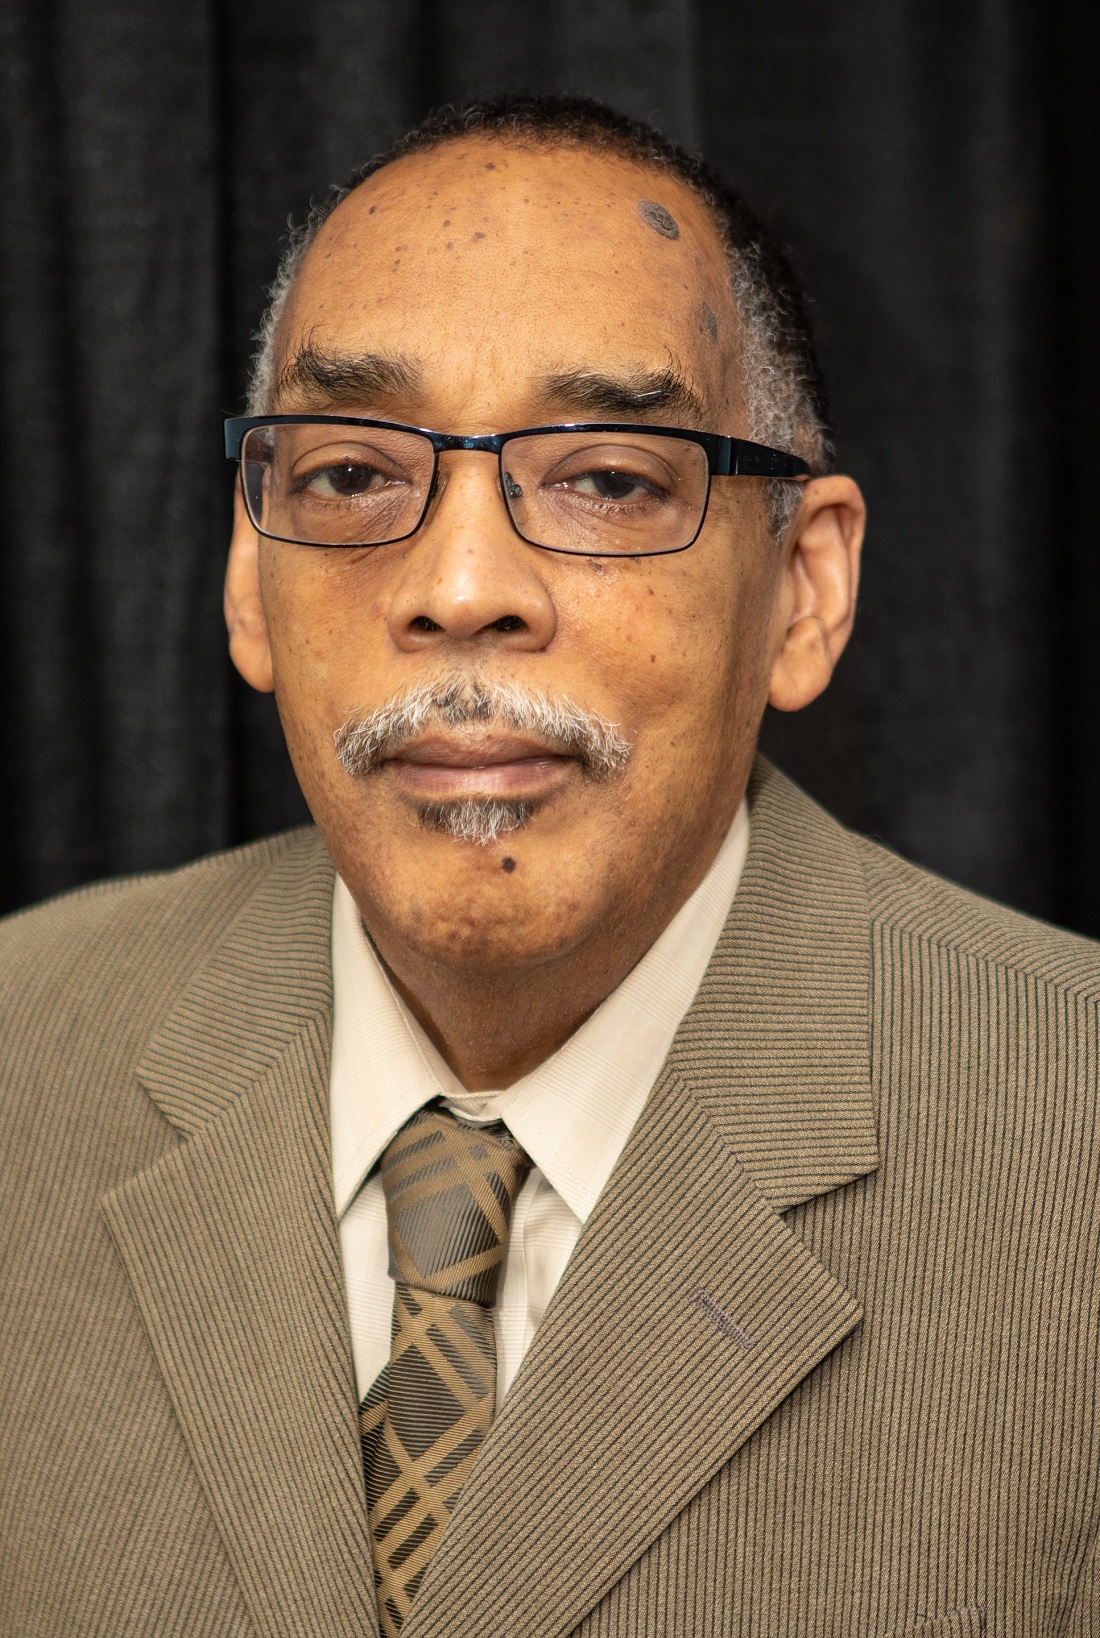 Long-time UofL faculty member joins School of Medicine to lead anti-racism initiatives